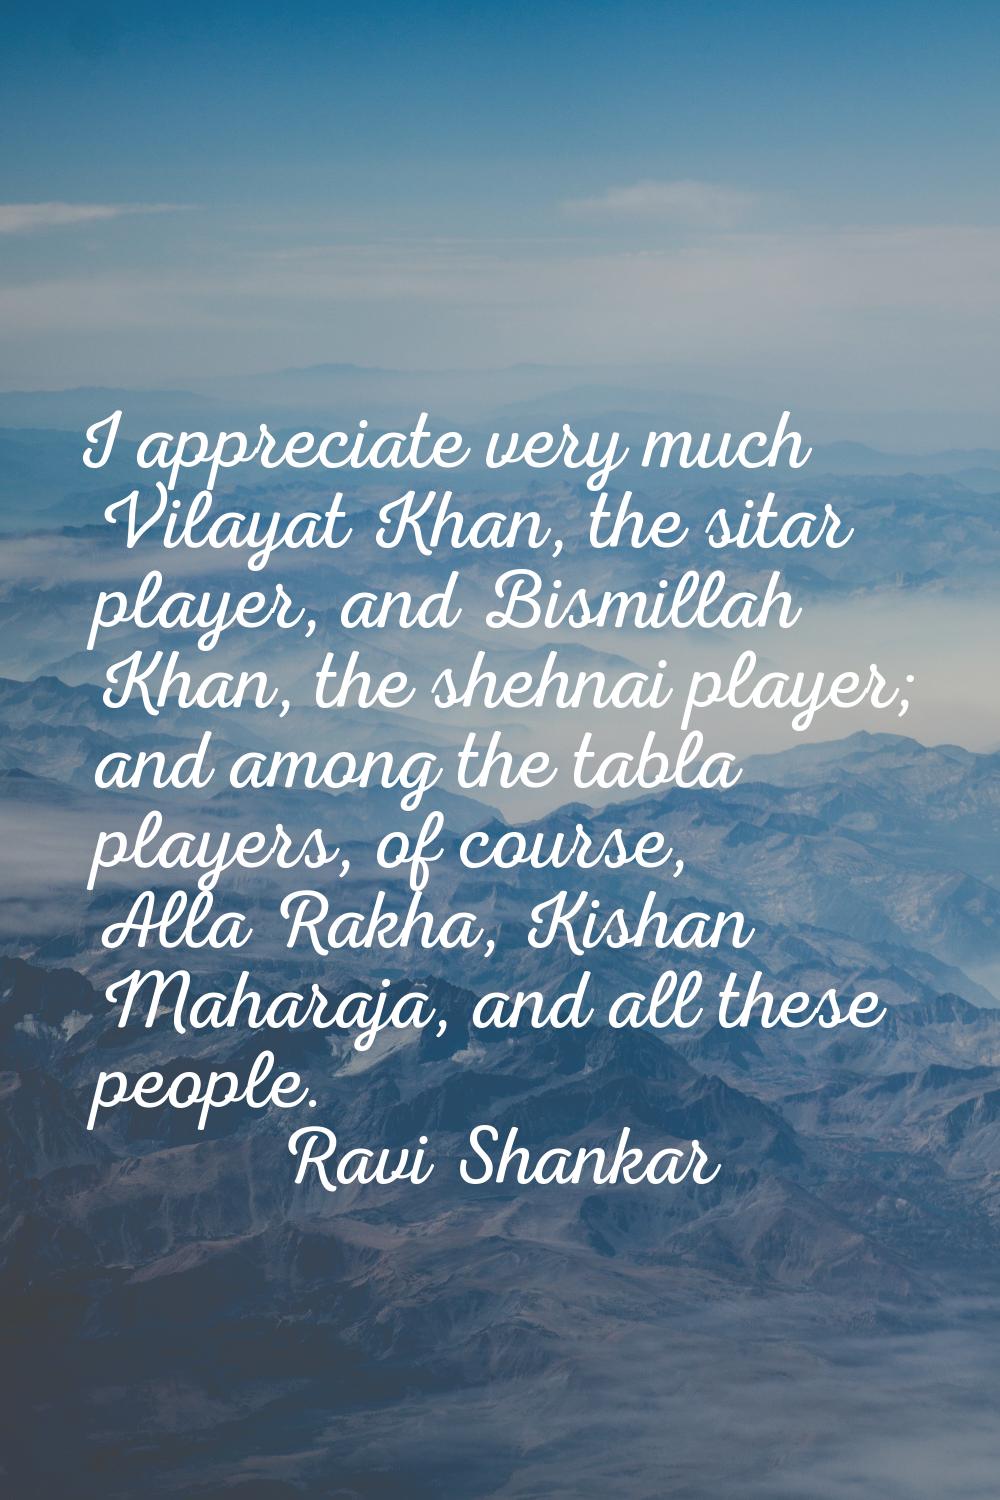 I appreciate very much Vilayat Khan, the sitar player, and Bismillah Khan, the shehnai player; and 